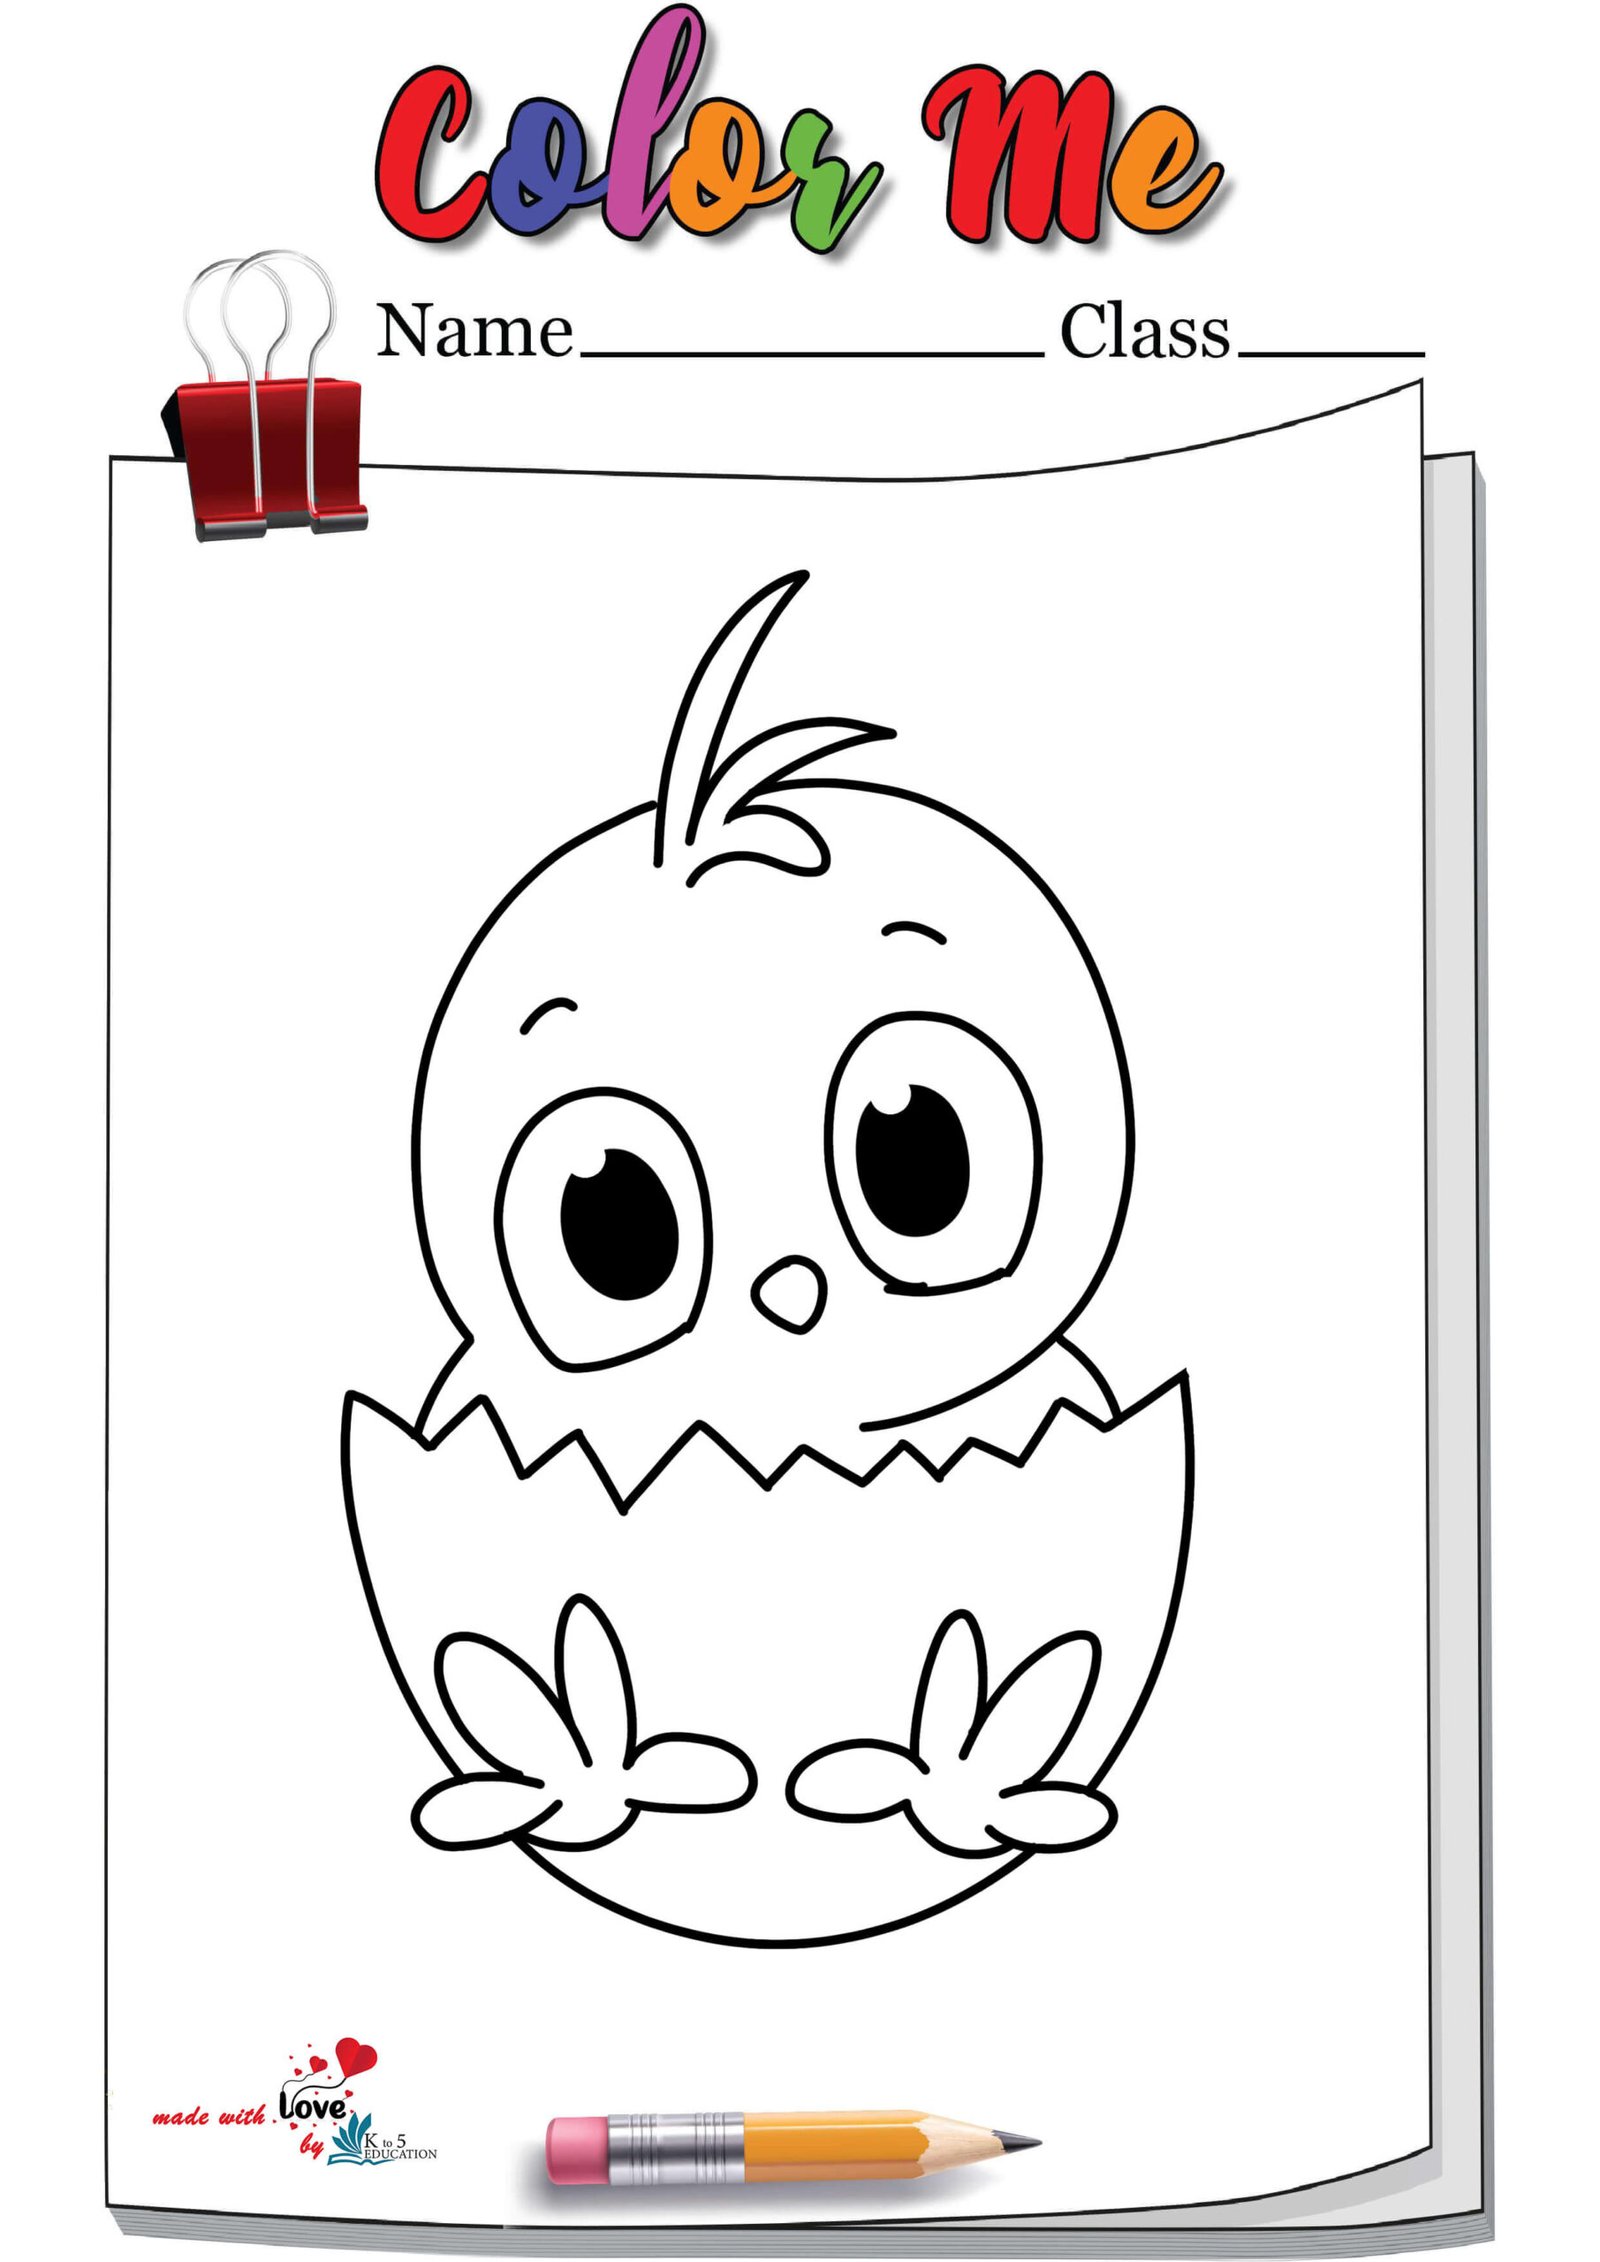 An Easter Chick Coloring Page